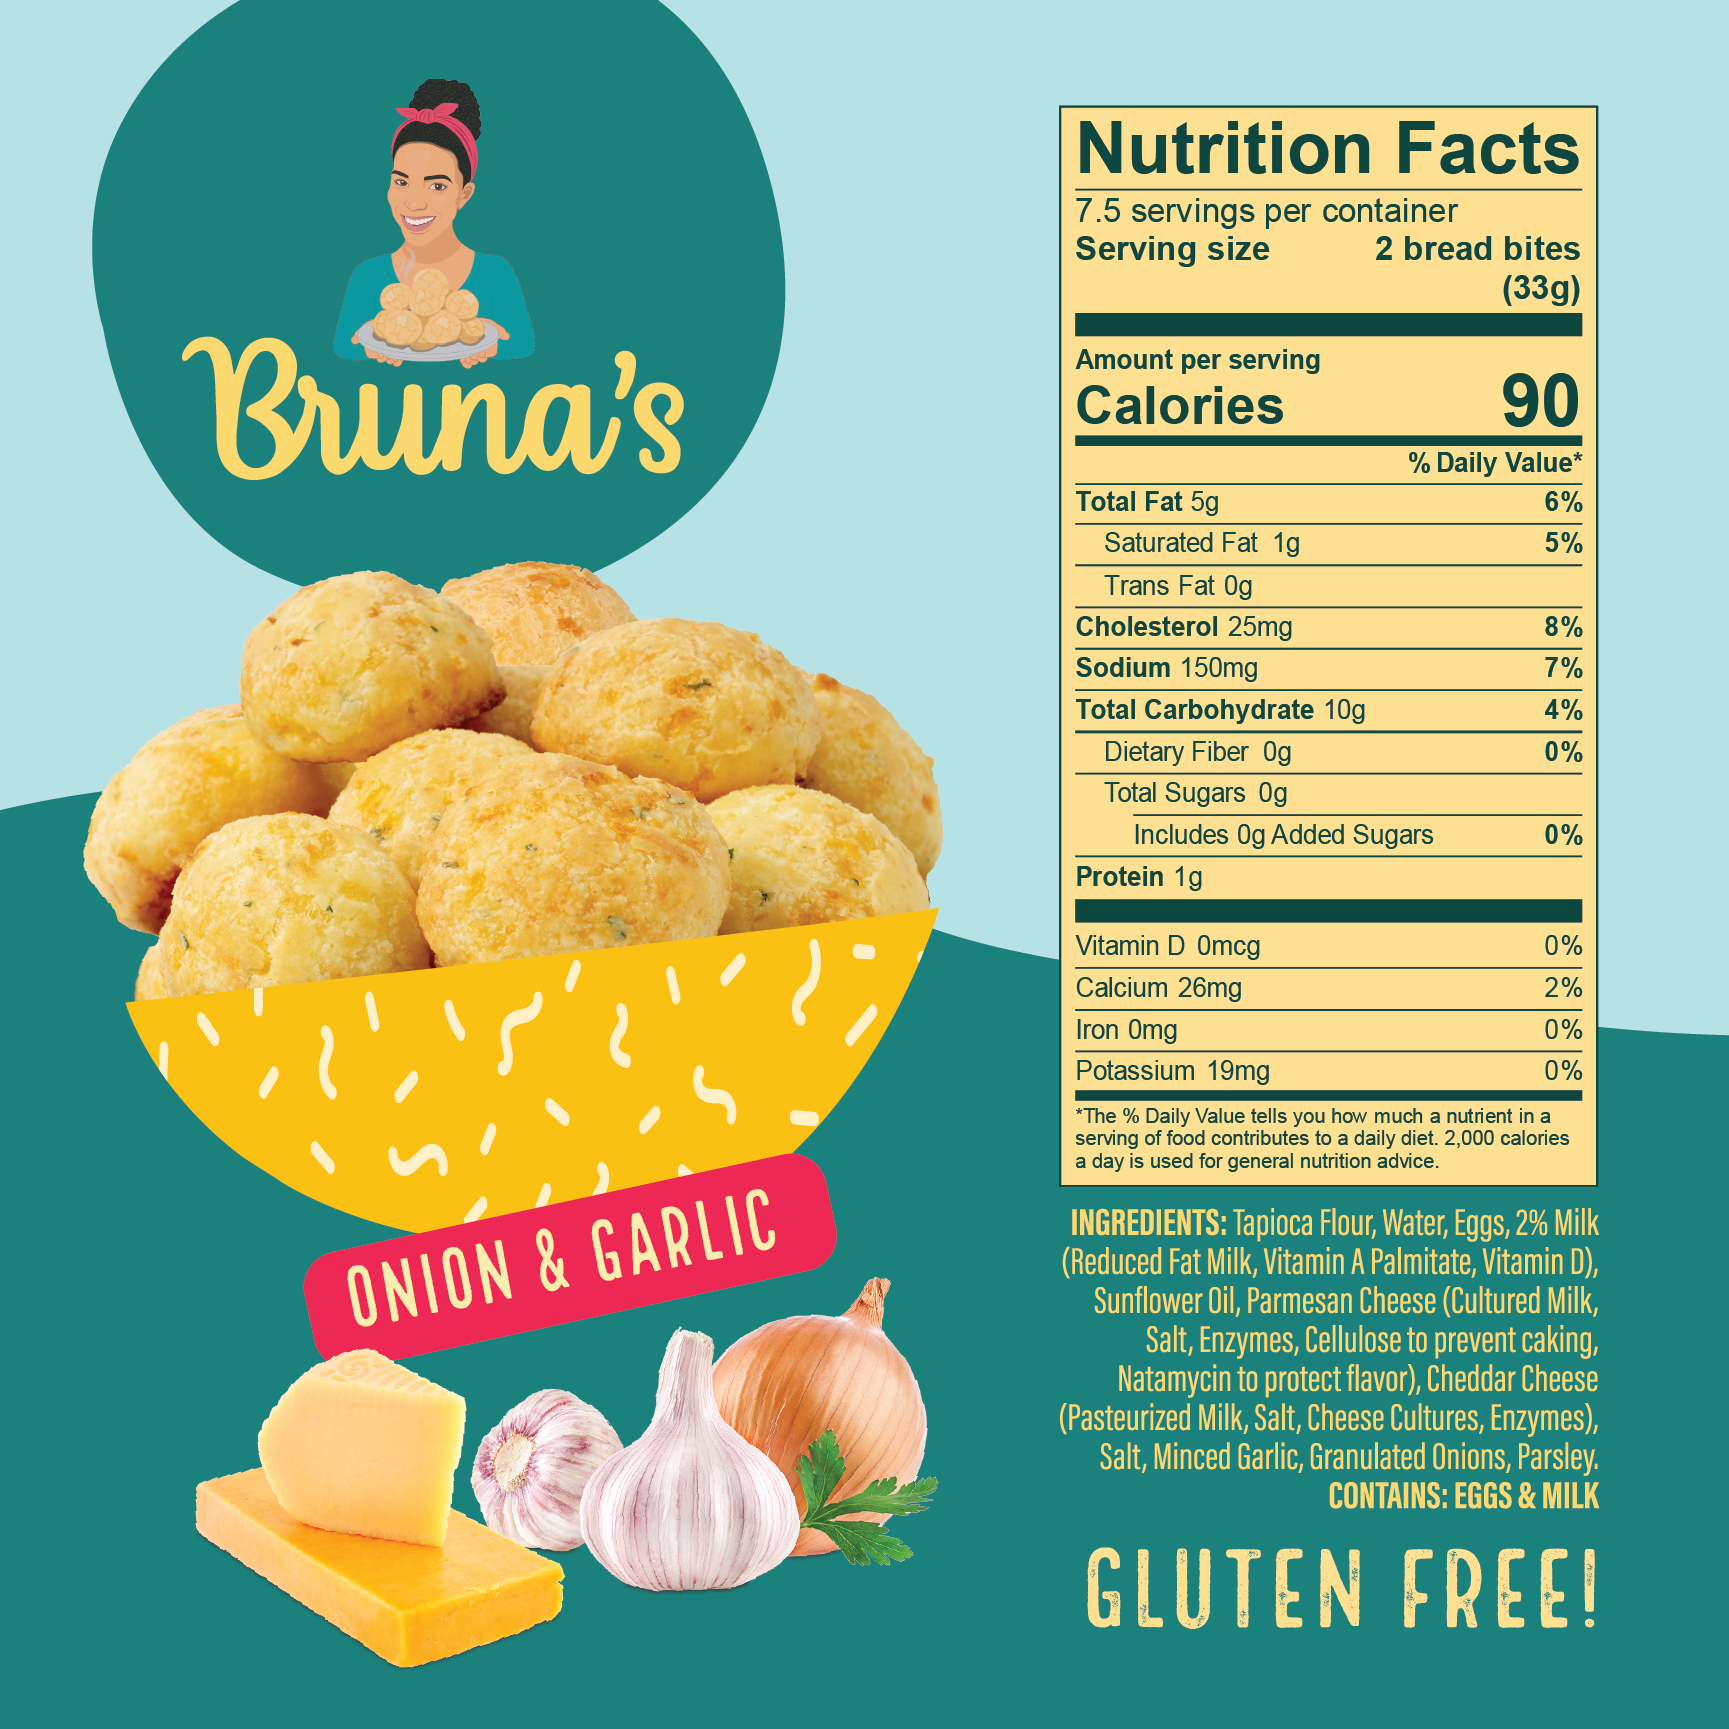 Bruna's Baked for You Garlic and Onion Cheese Bread Nutrition Facts